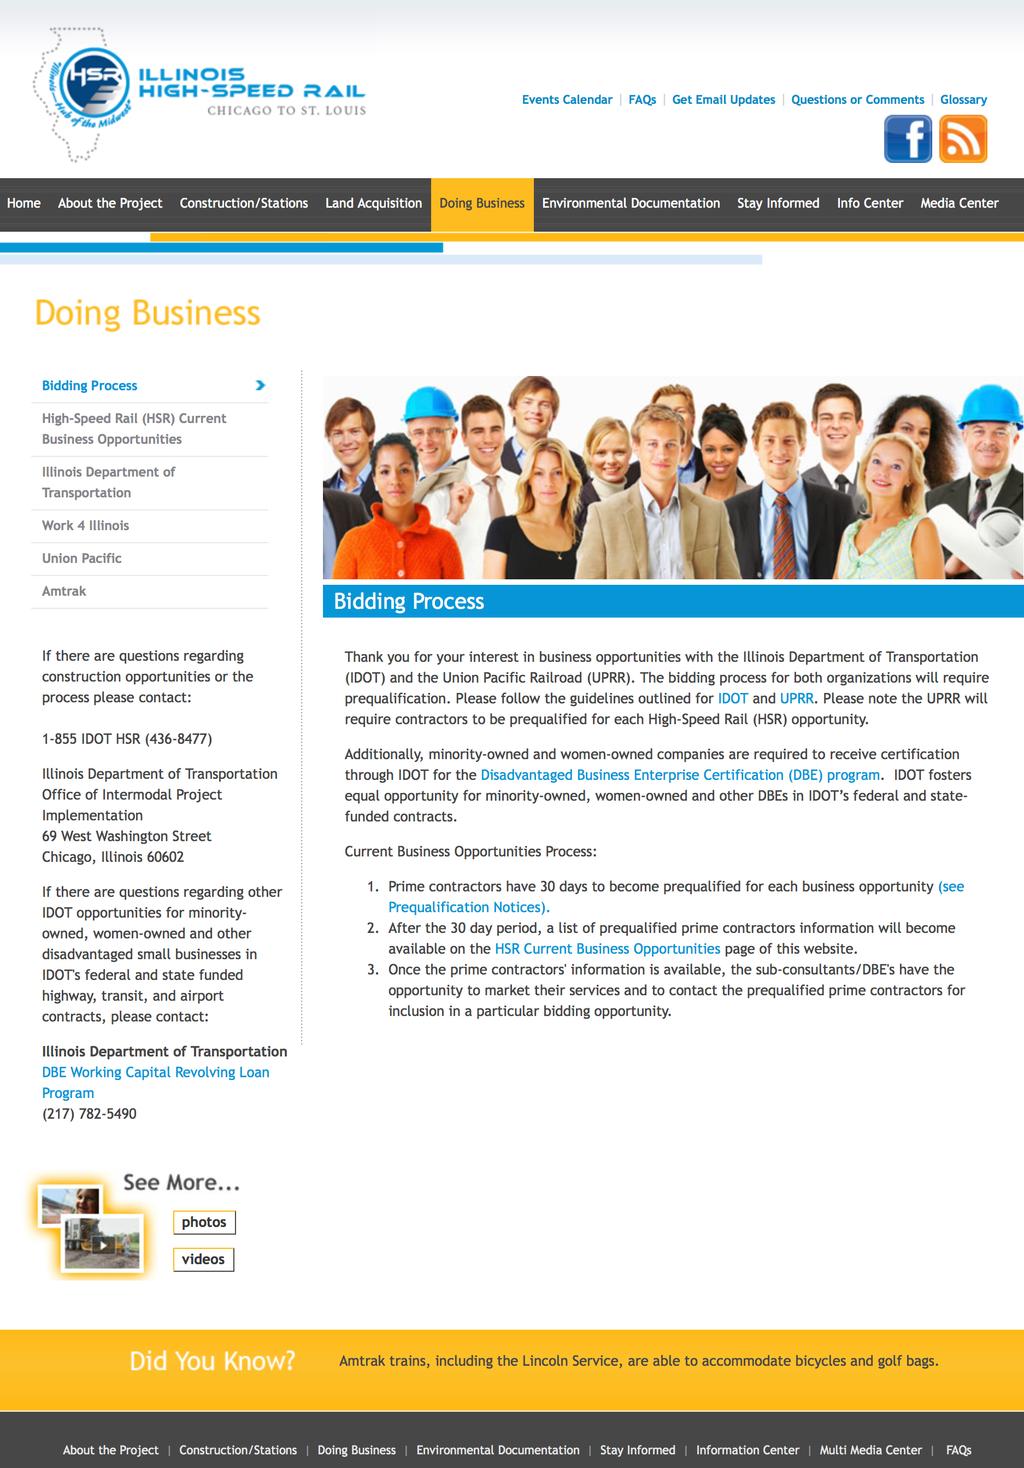 please visit the DOING BUSINESS section of